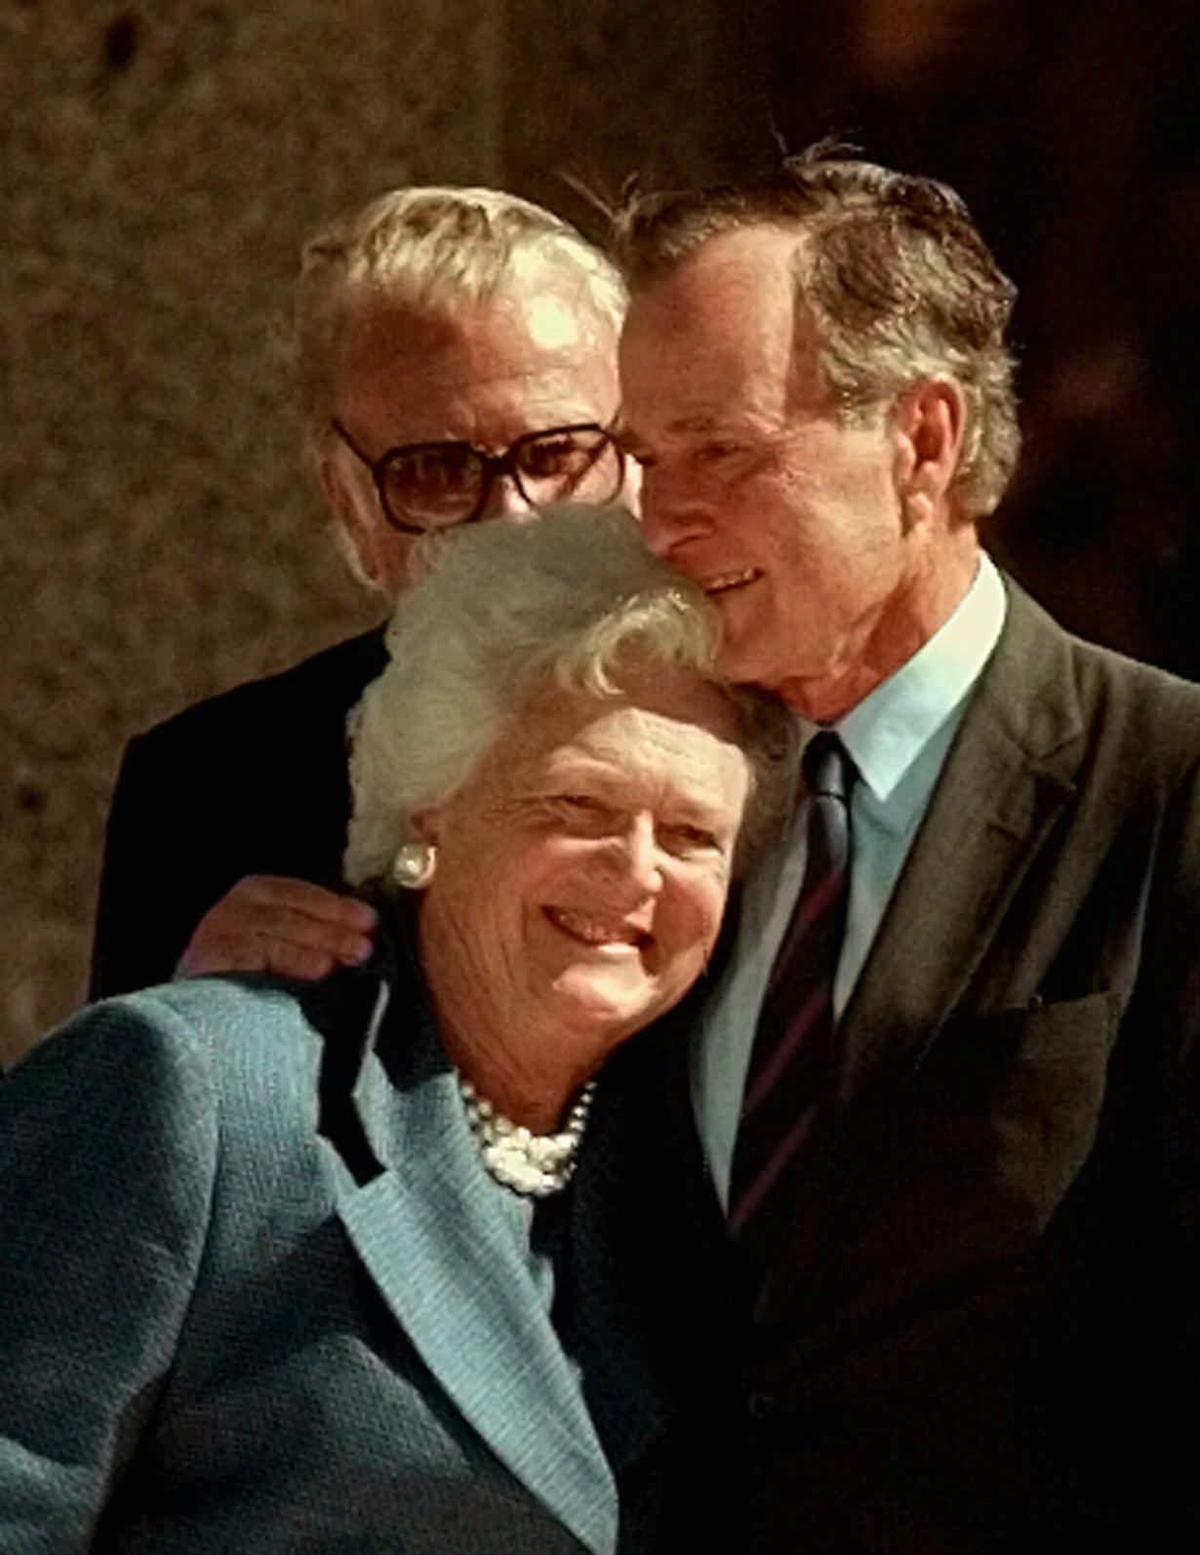 Former President George H.W. Bush hugs his wife, Barbara, after speaking at the dedication of the George Bush Presidential Library in College Station, TX., on Nov. 6, 1997. (AP Photo/Pat Sullivan)